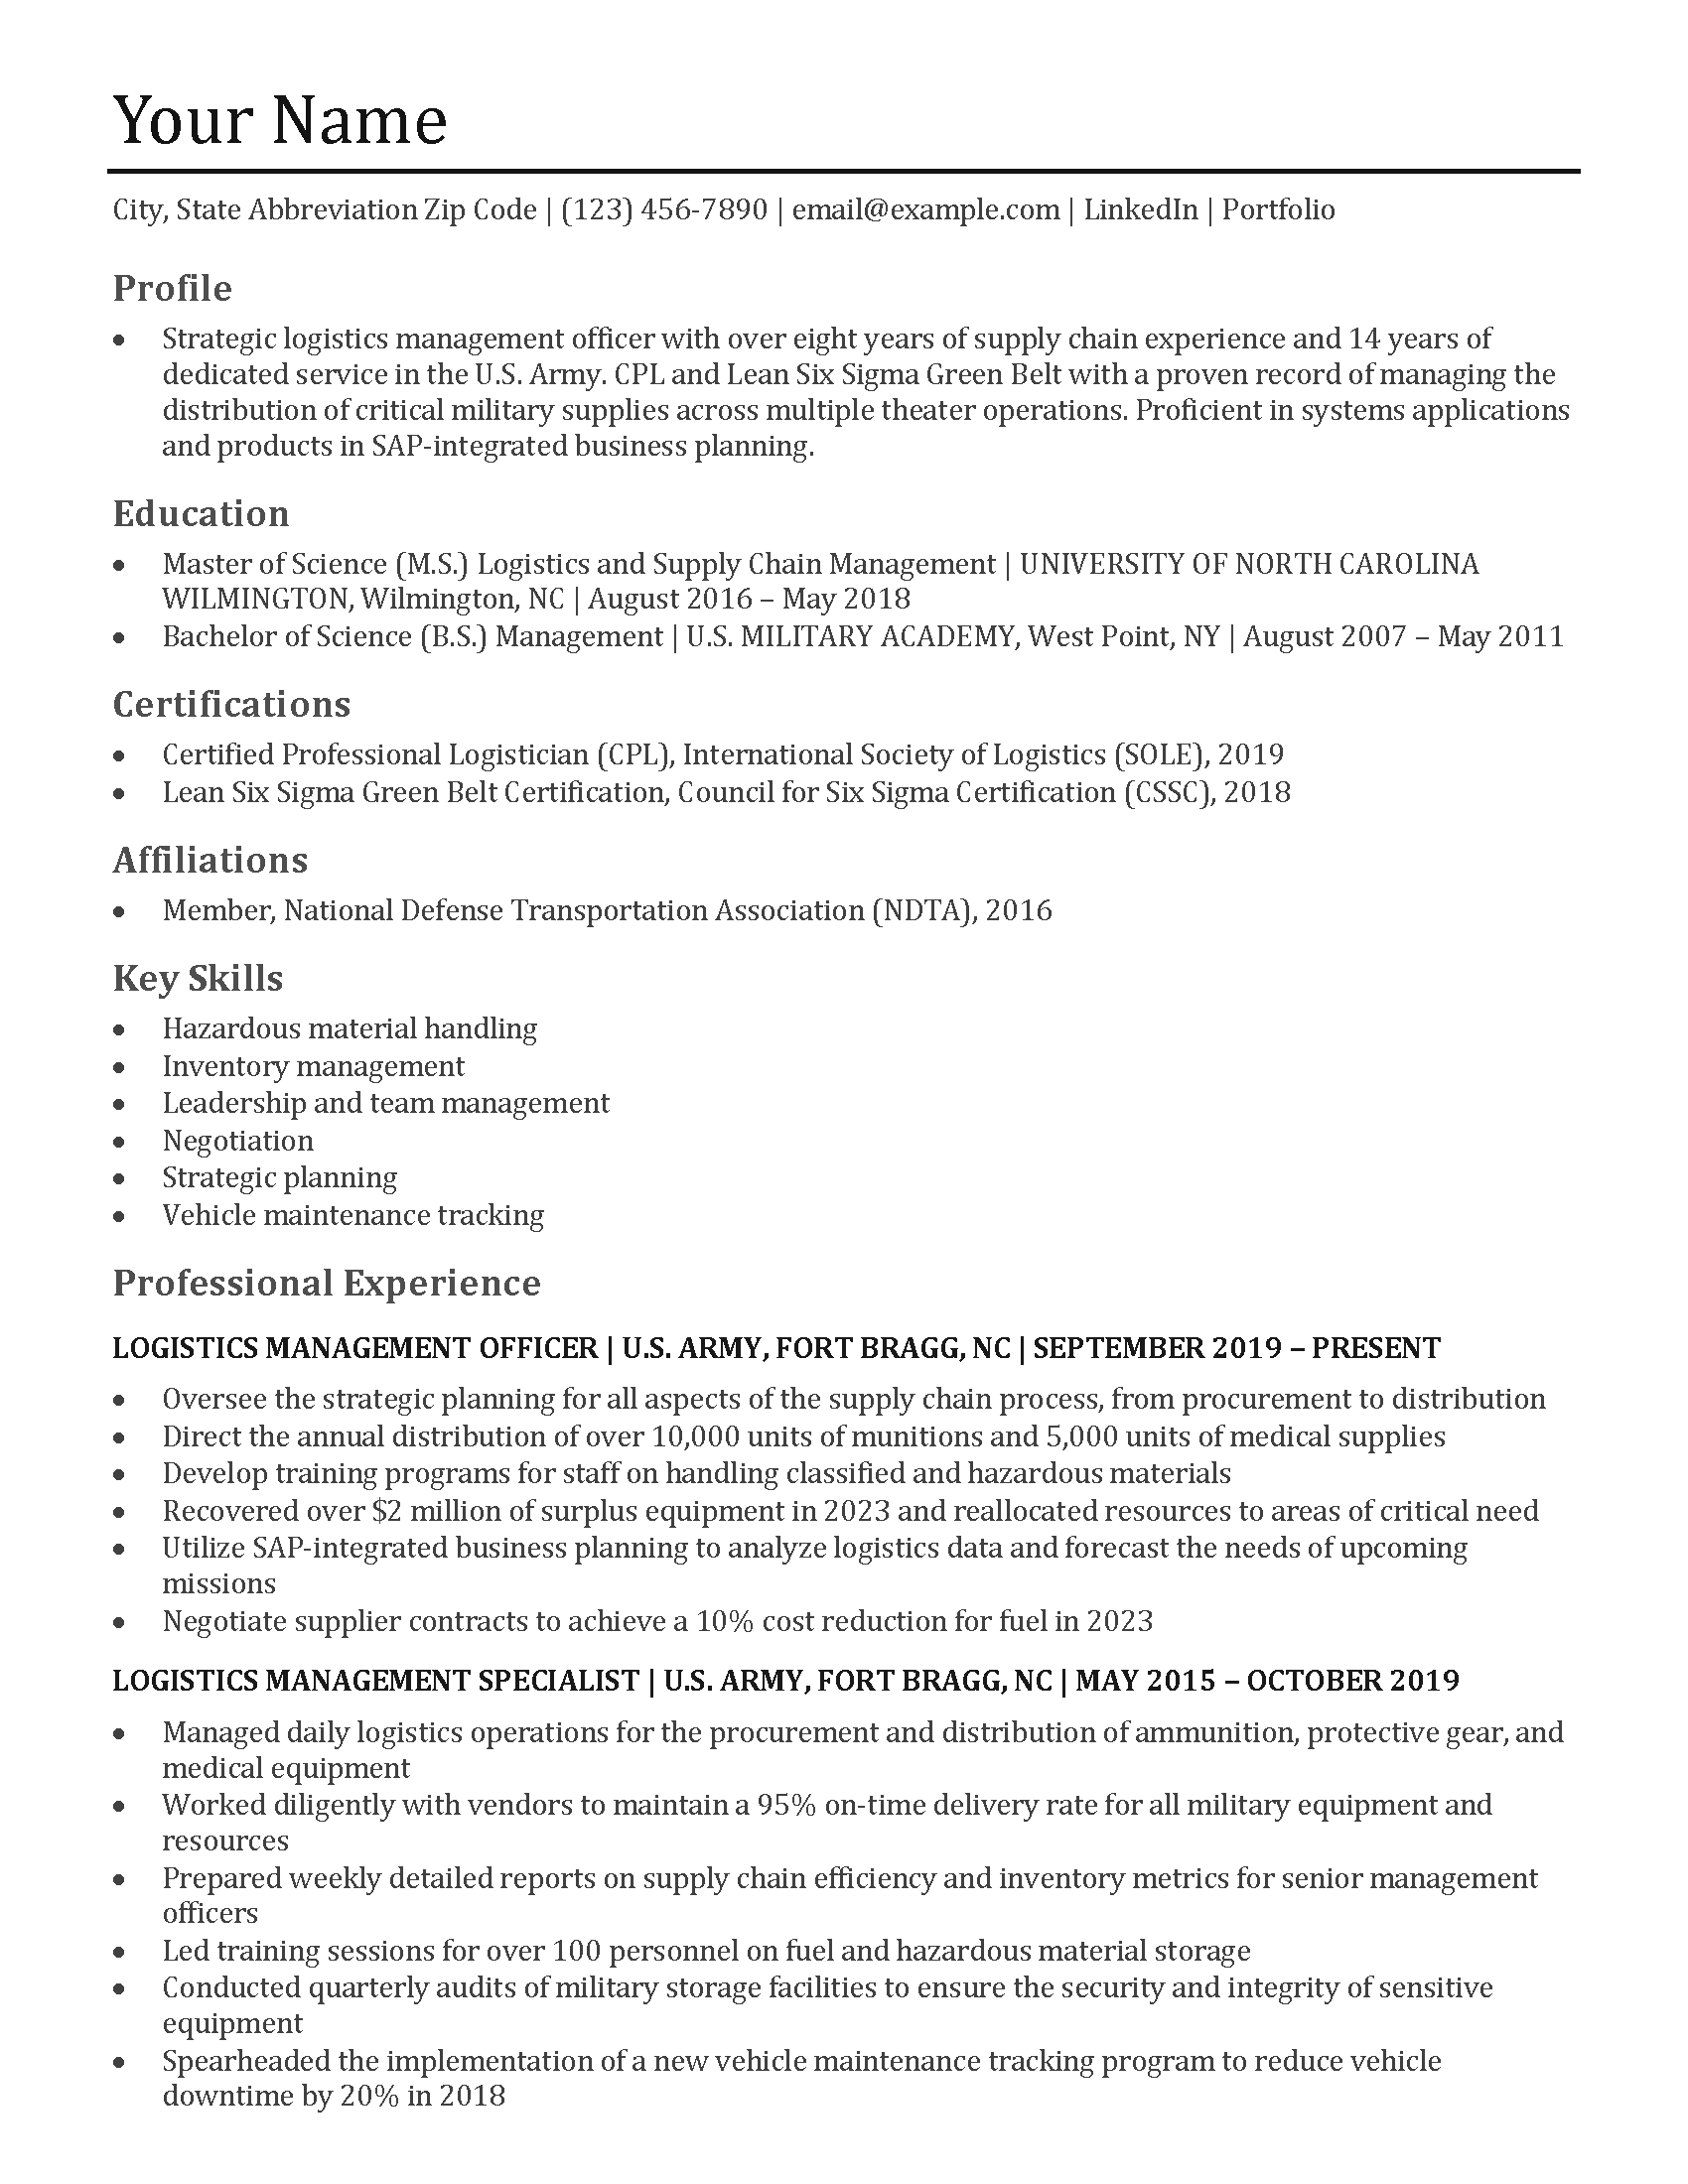 Military Resume Templates and Examples